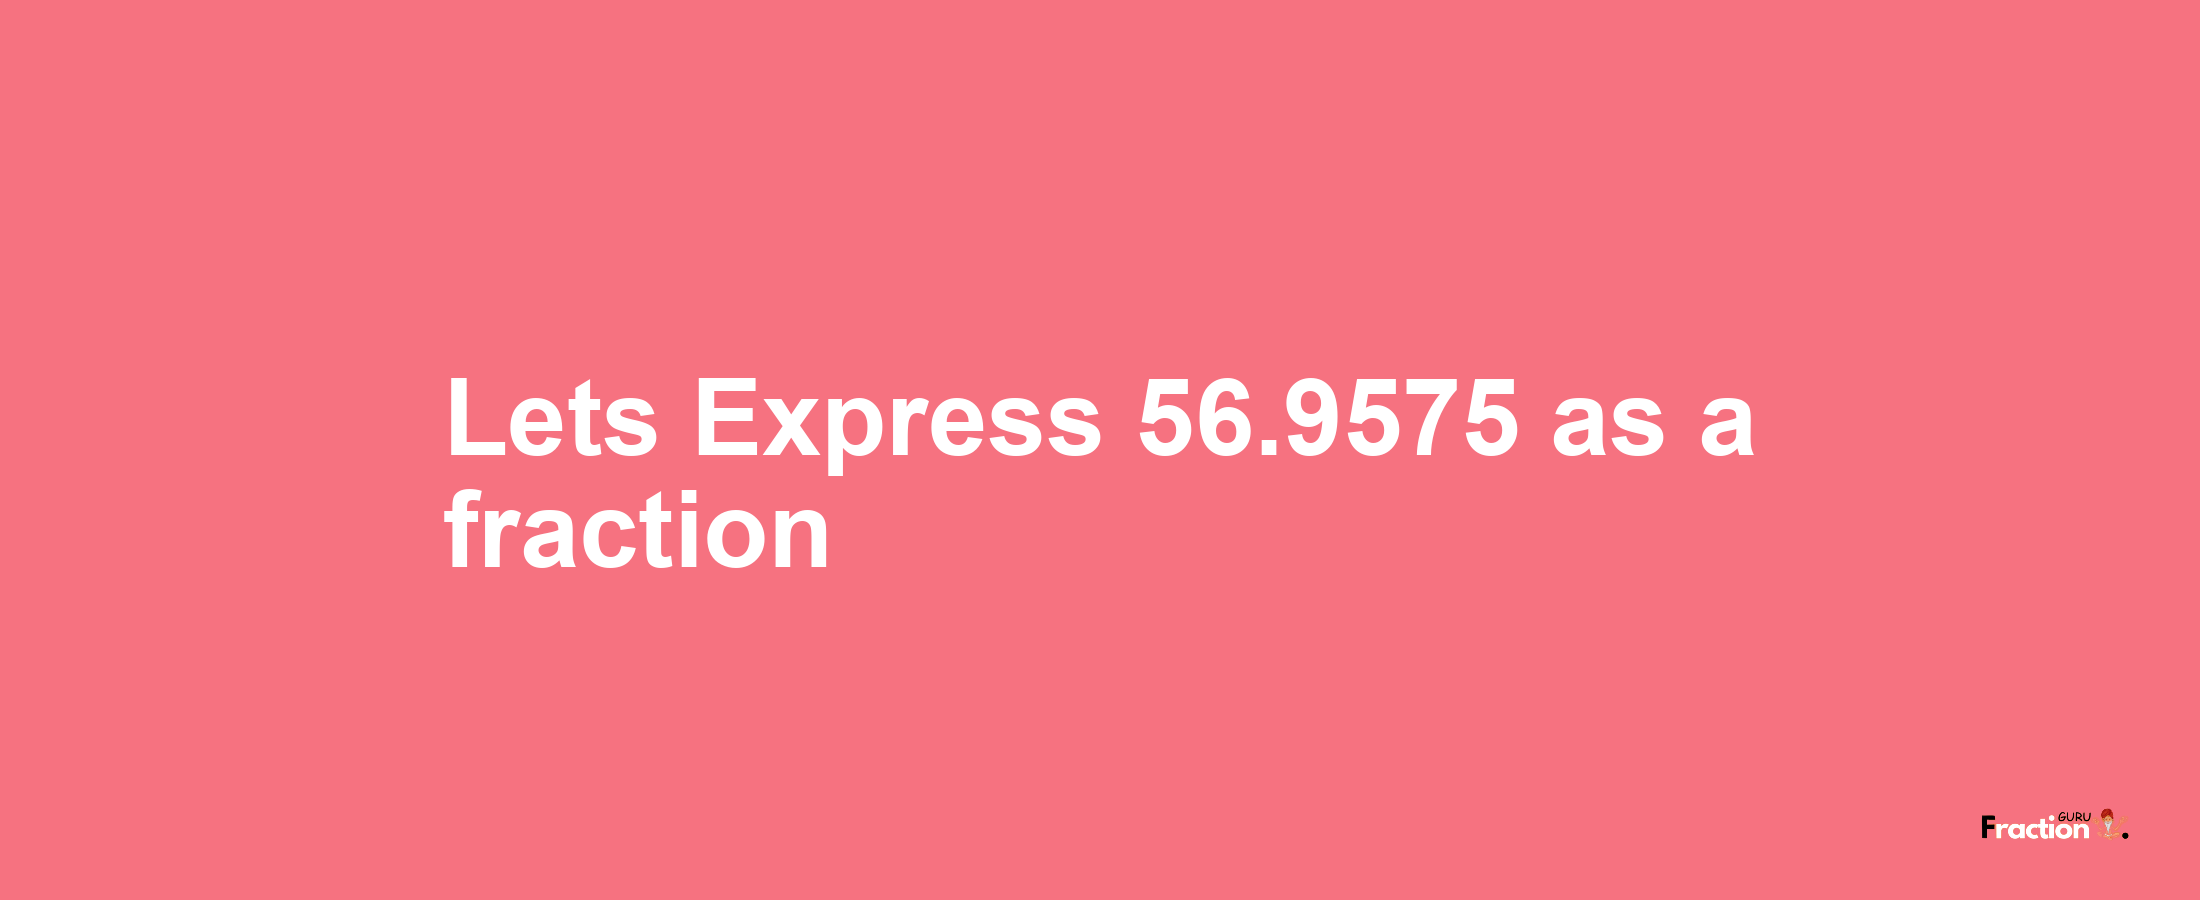 Lets Express 56.9575 as afraction